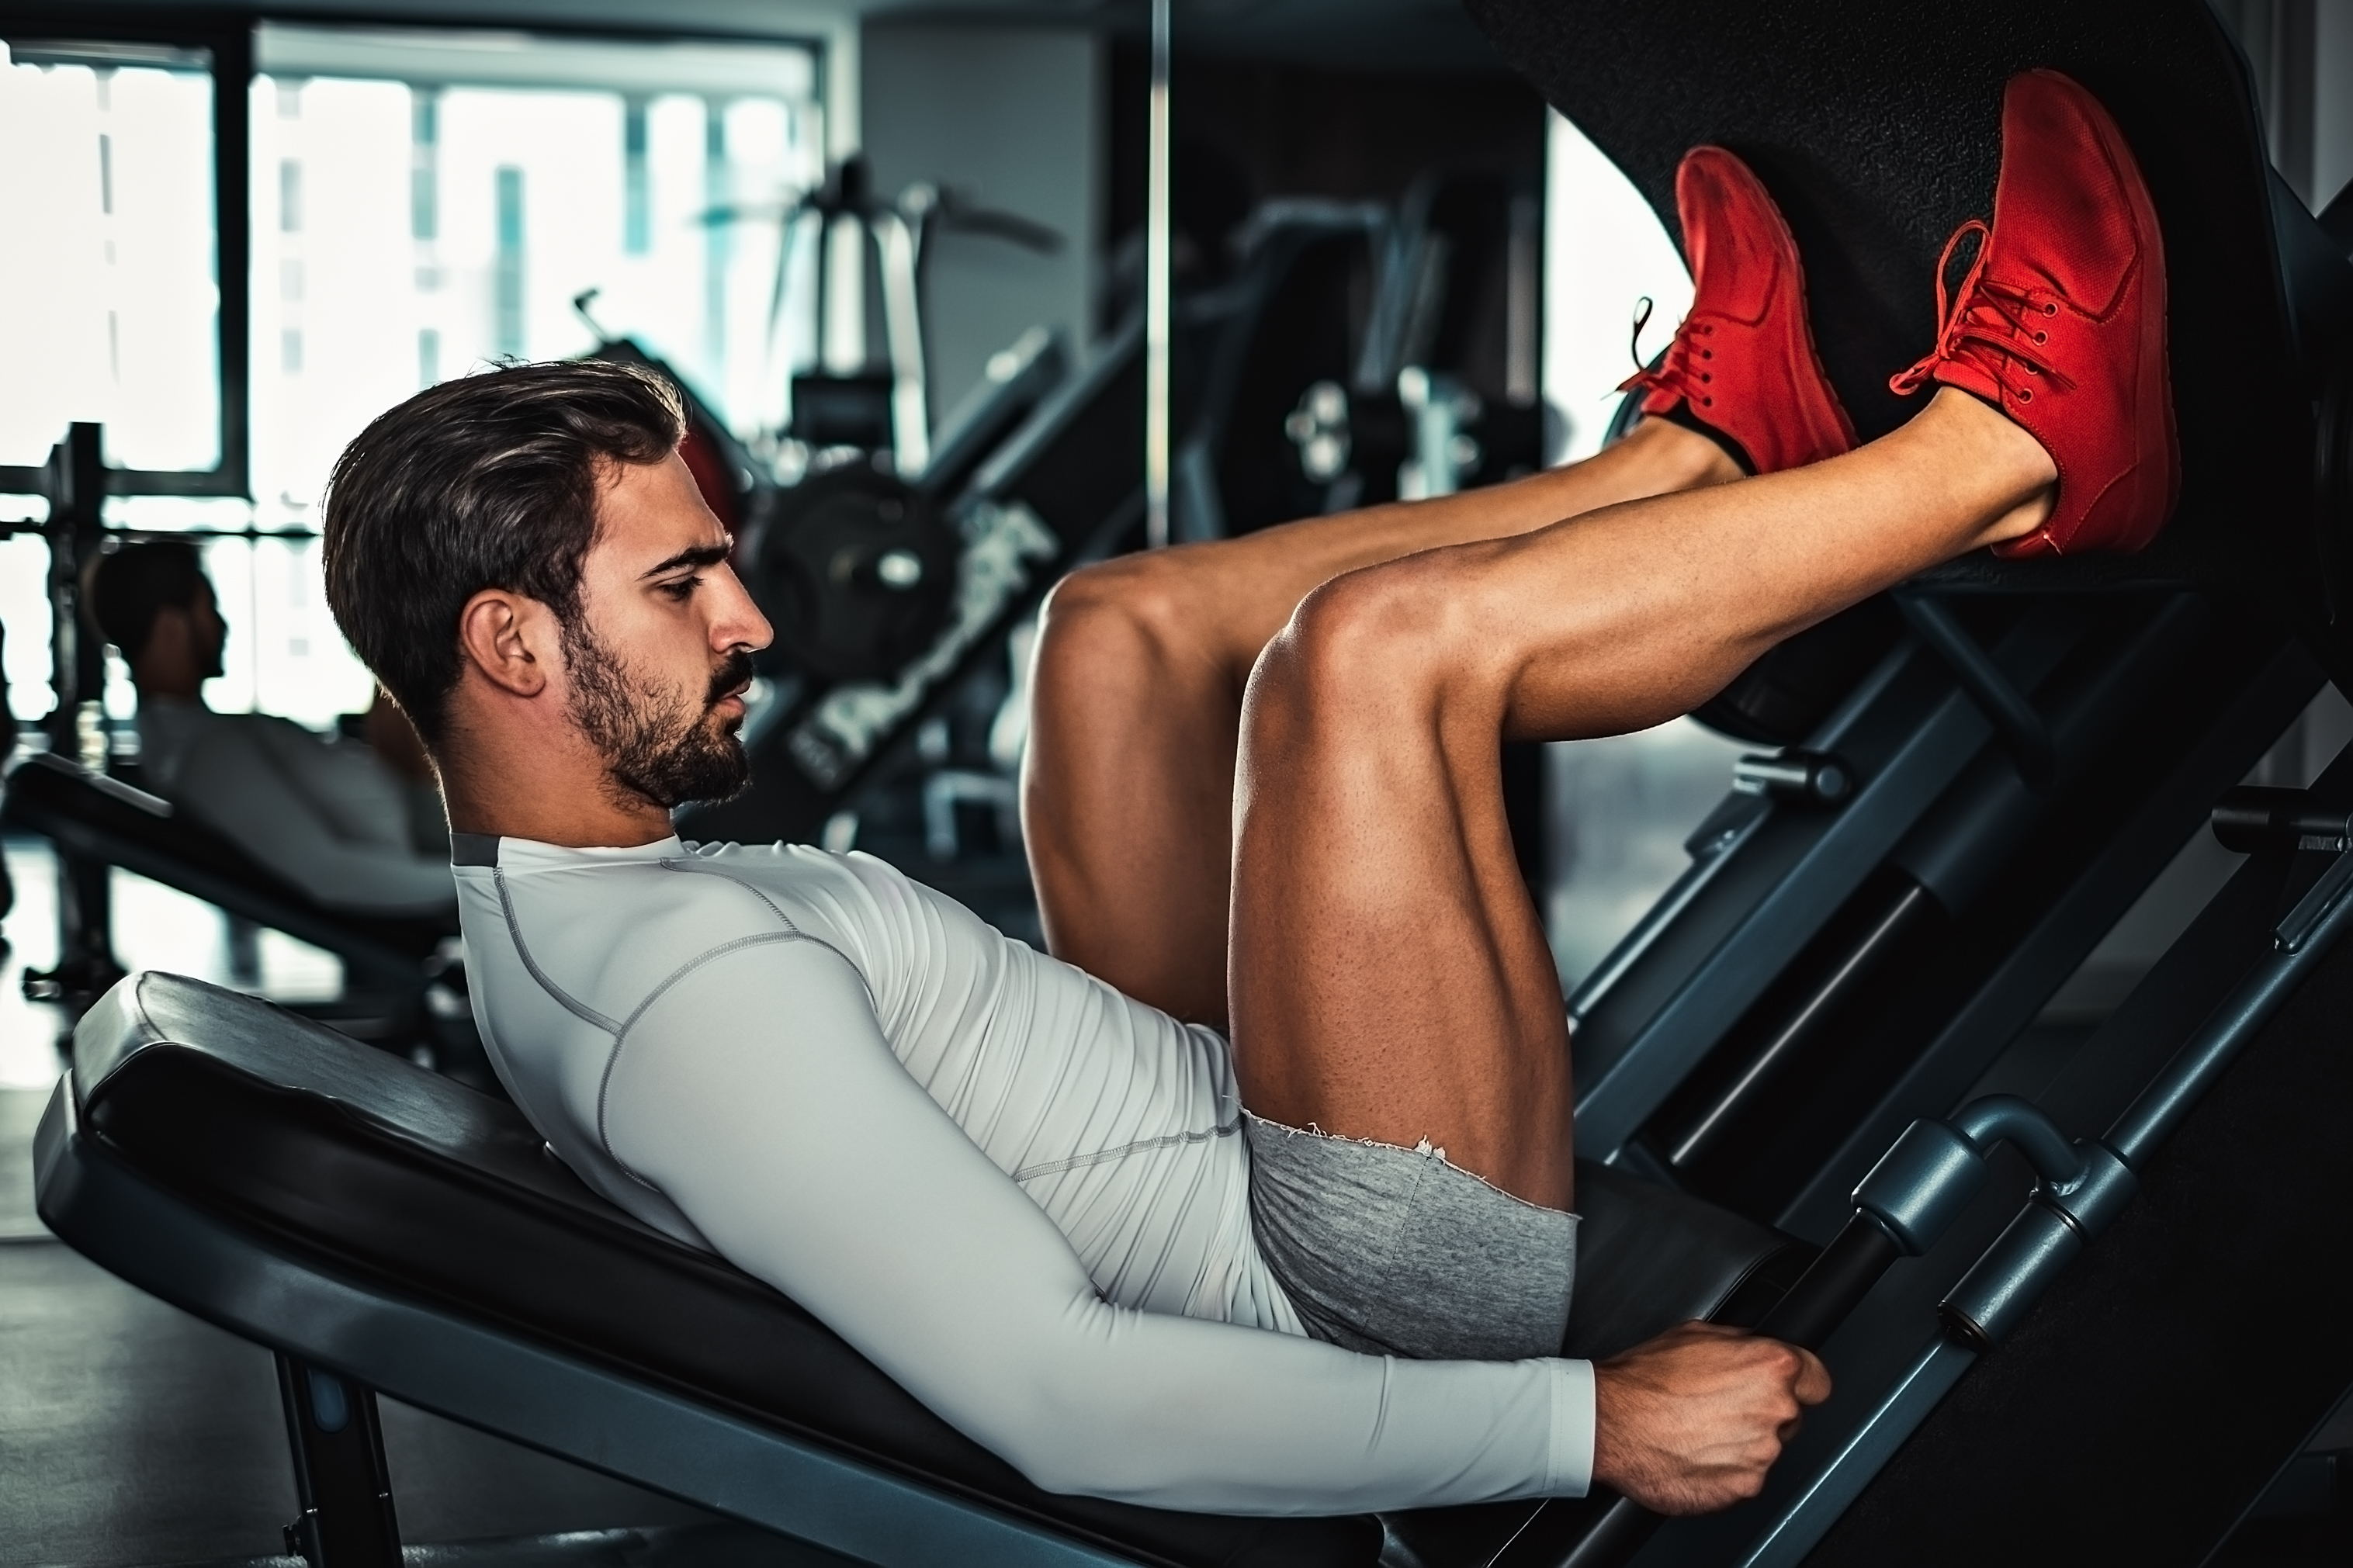 Why Leg Day Makes You Sweat More